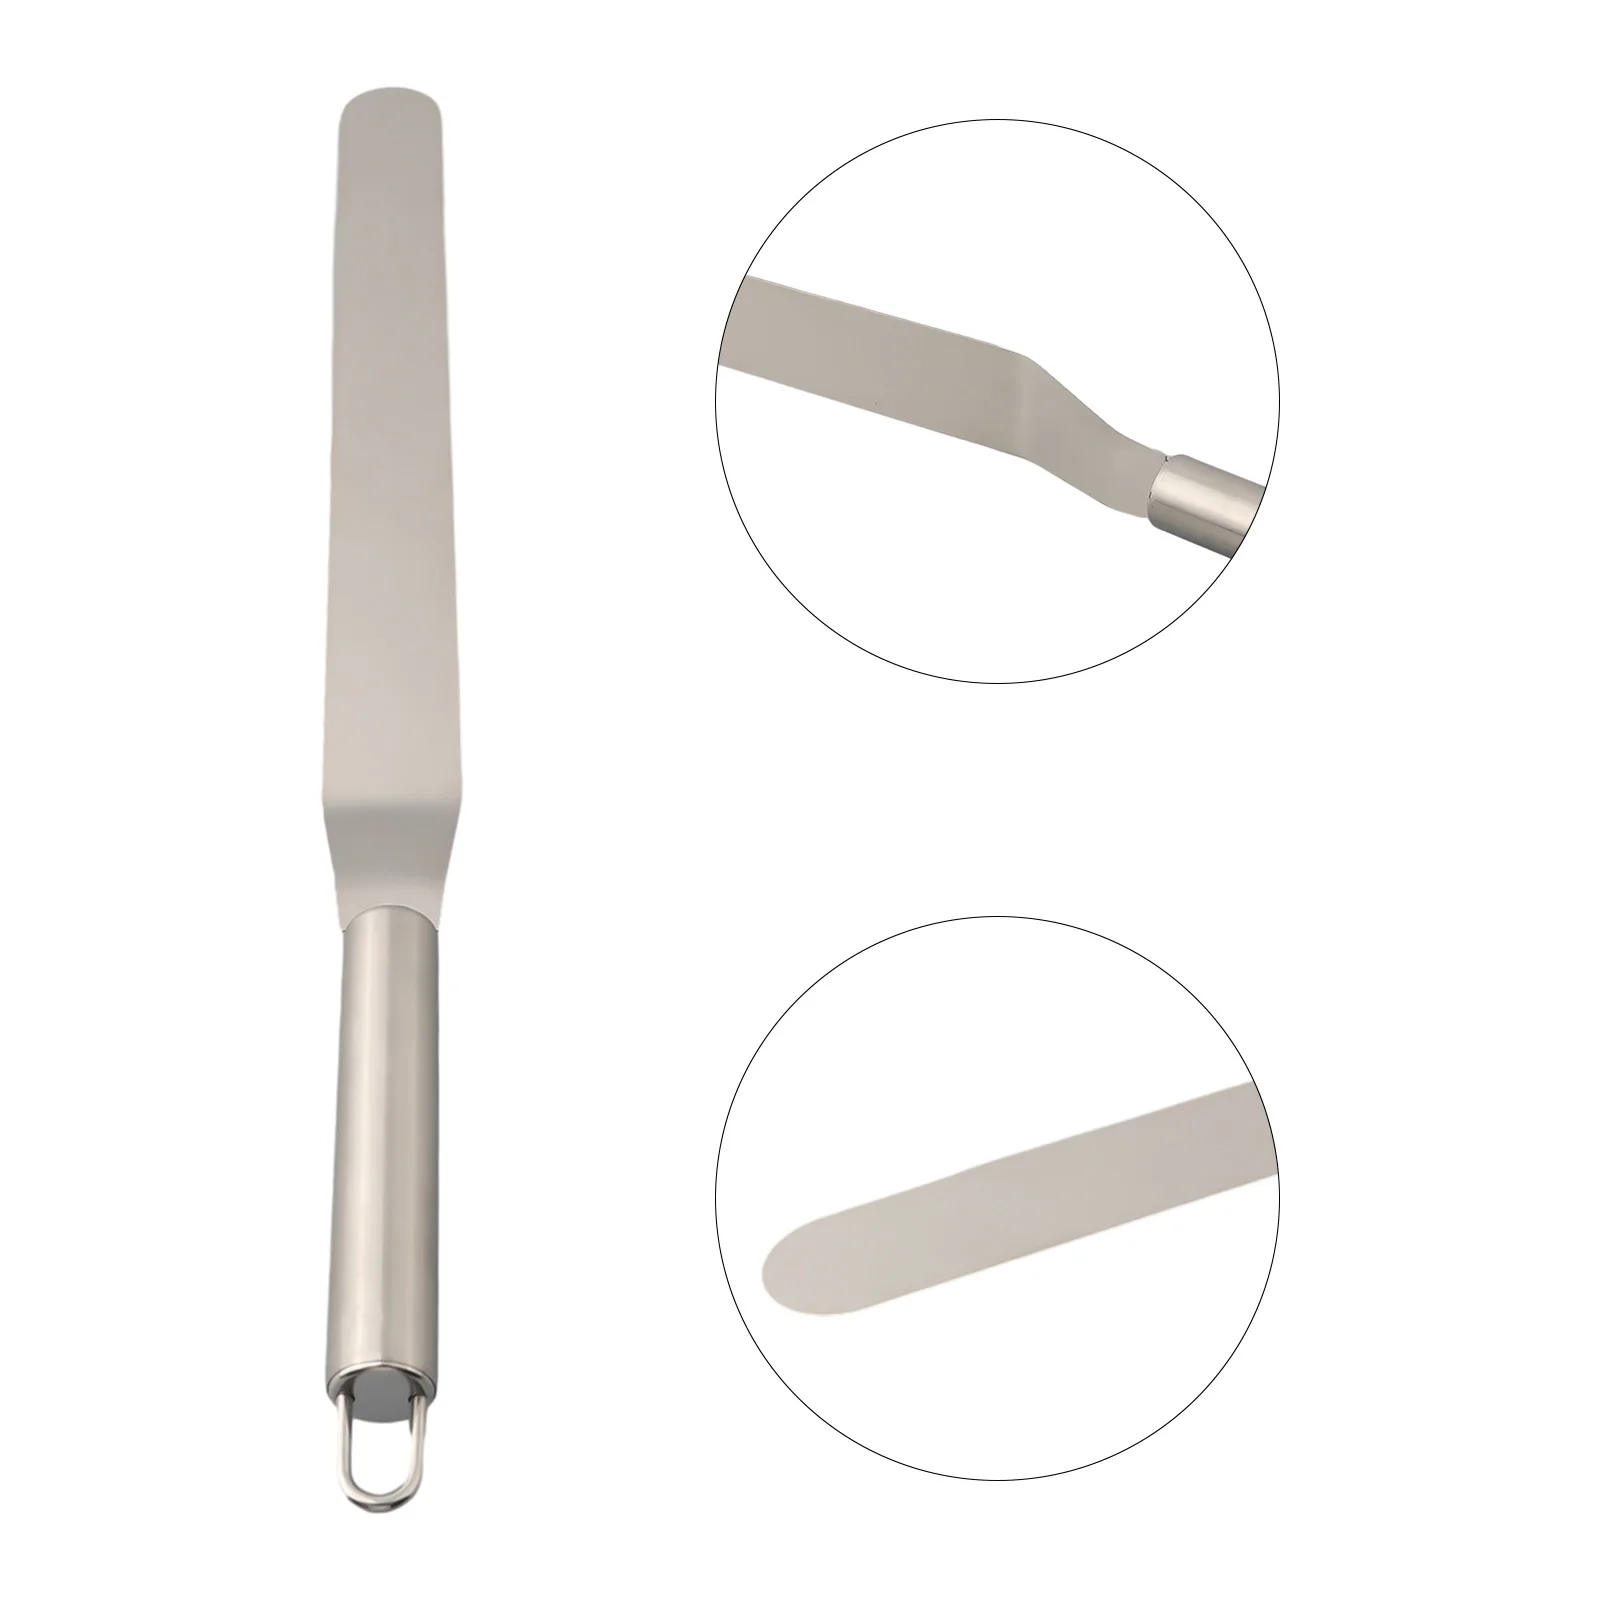 

Upgrade Your Baking Supplies with This Stainless Steel Cake Cream Icing Spreader Set Perfect for All Your Needs